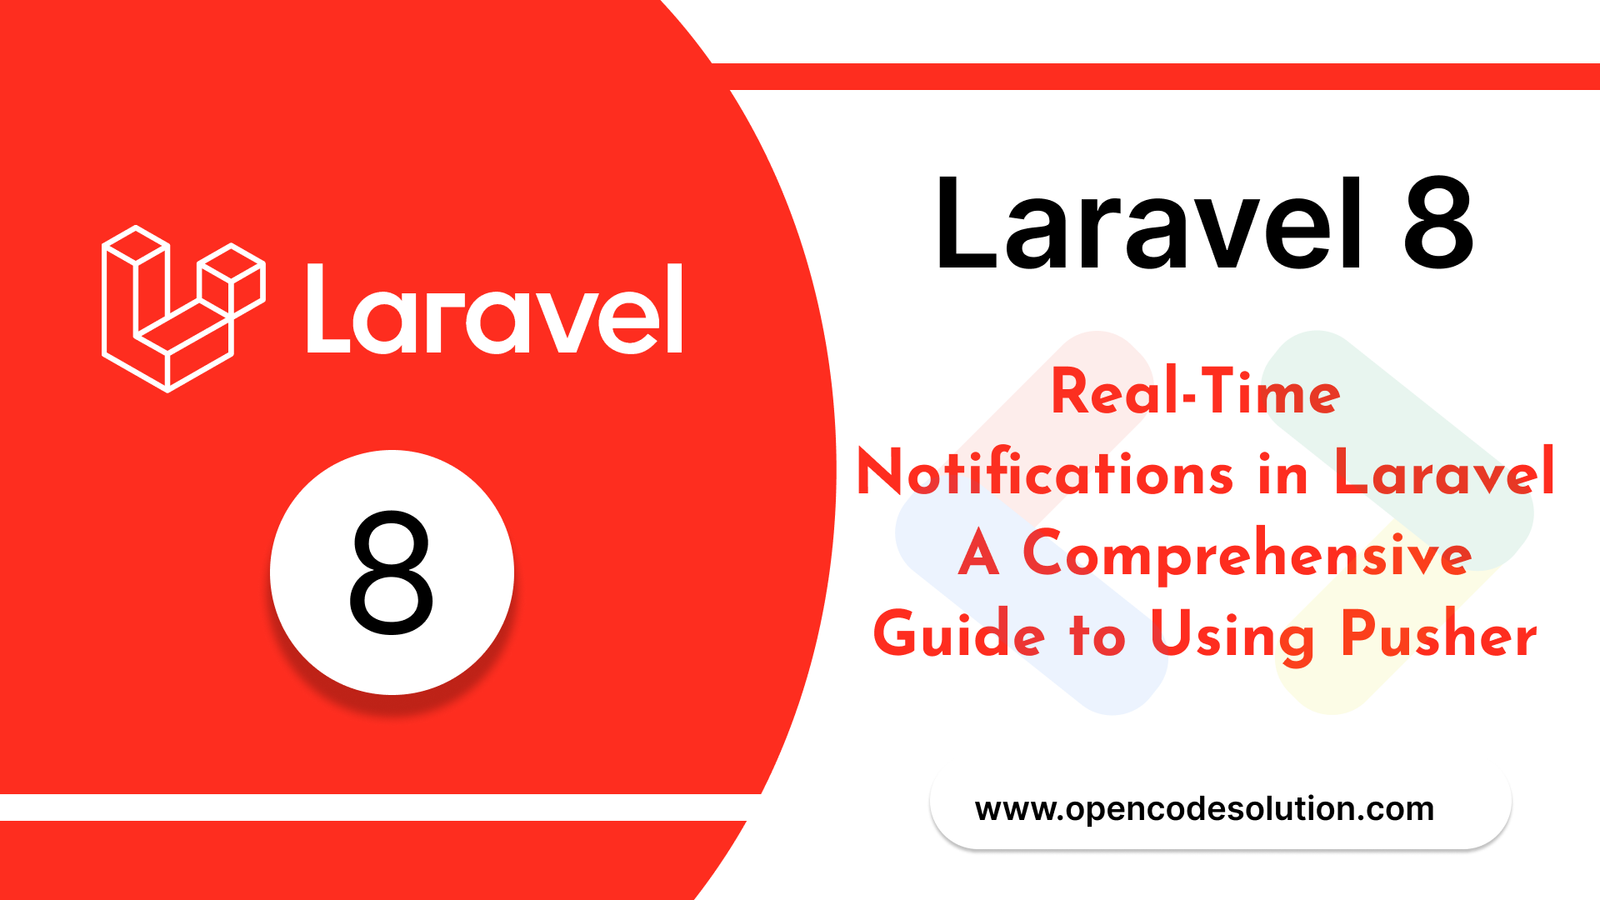 Real-Time Notifications in Laravel: A Comprehensive Guide to Using Pusher